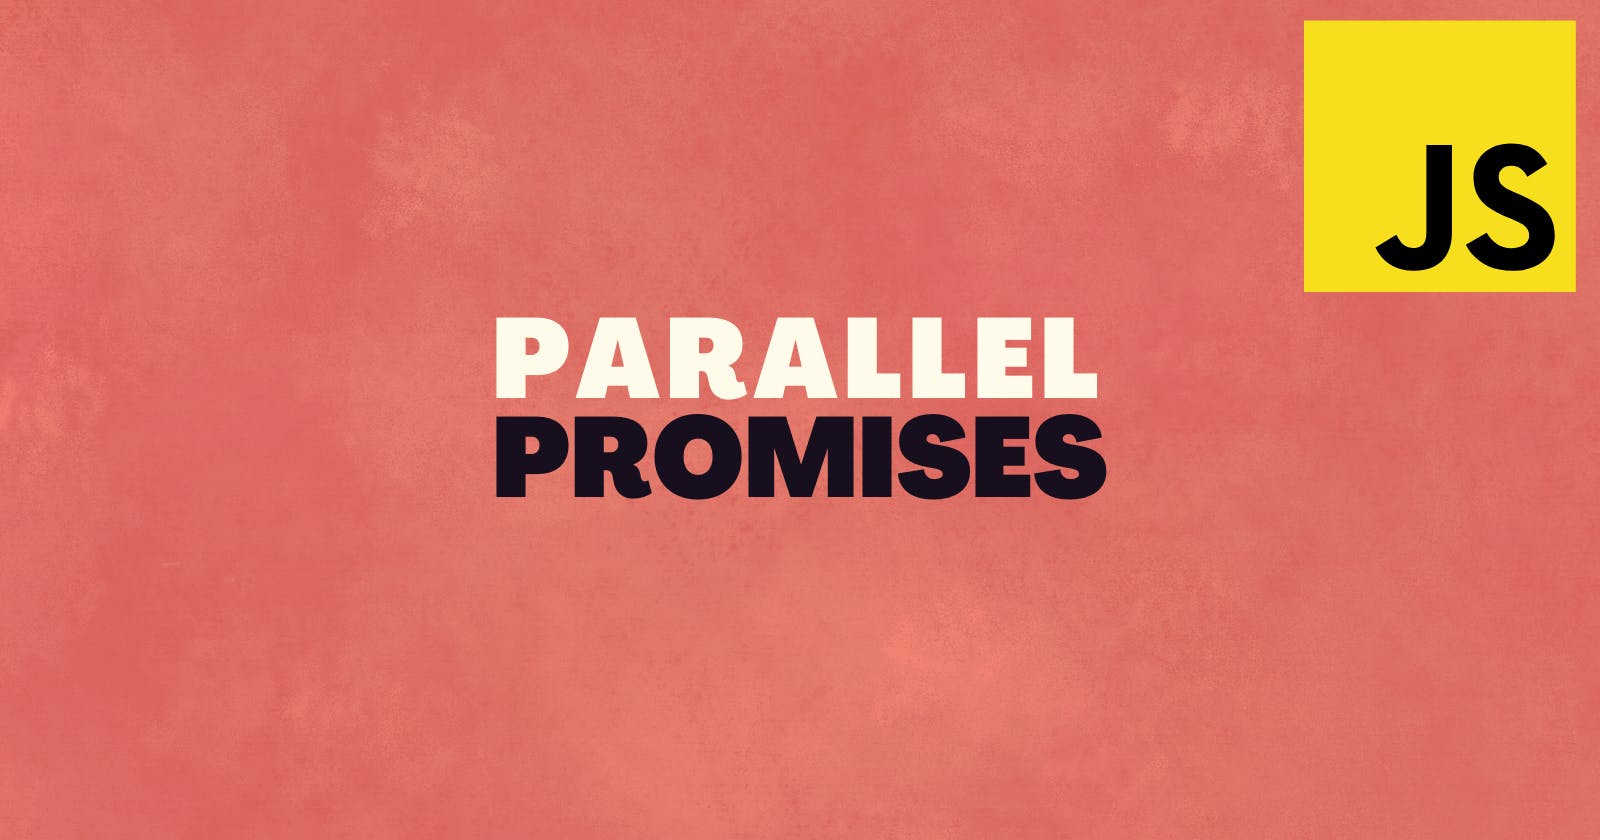 You Should Use Parallel Promises